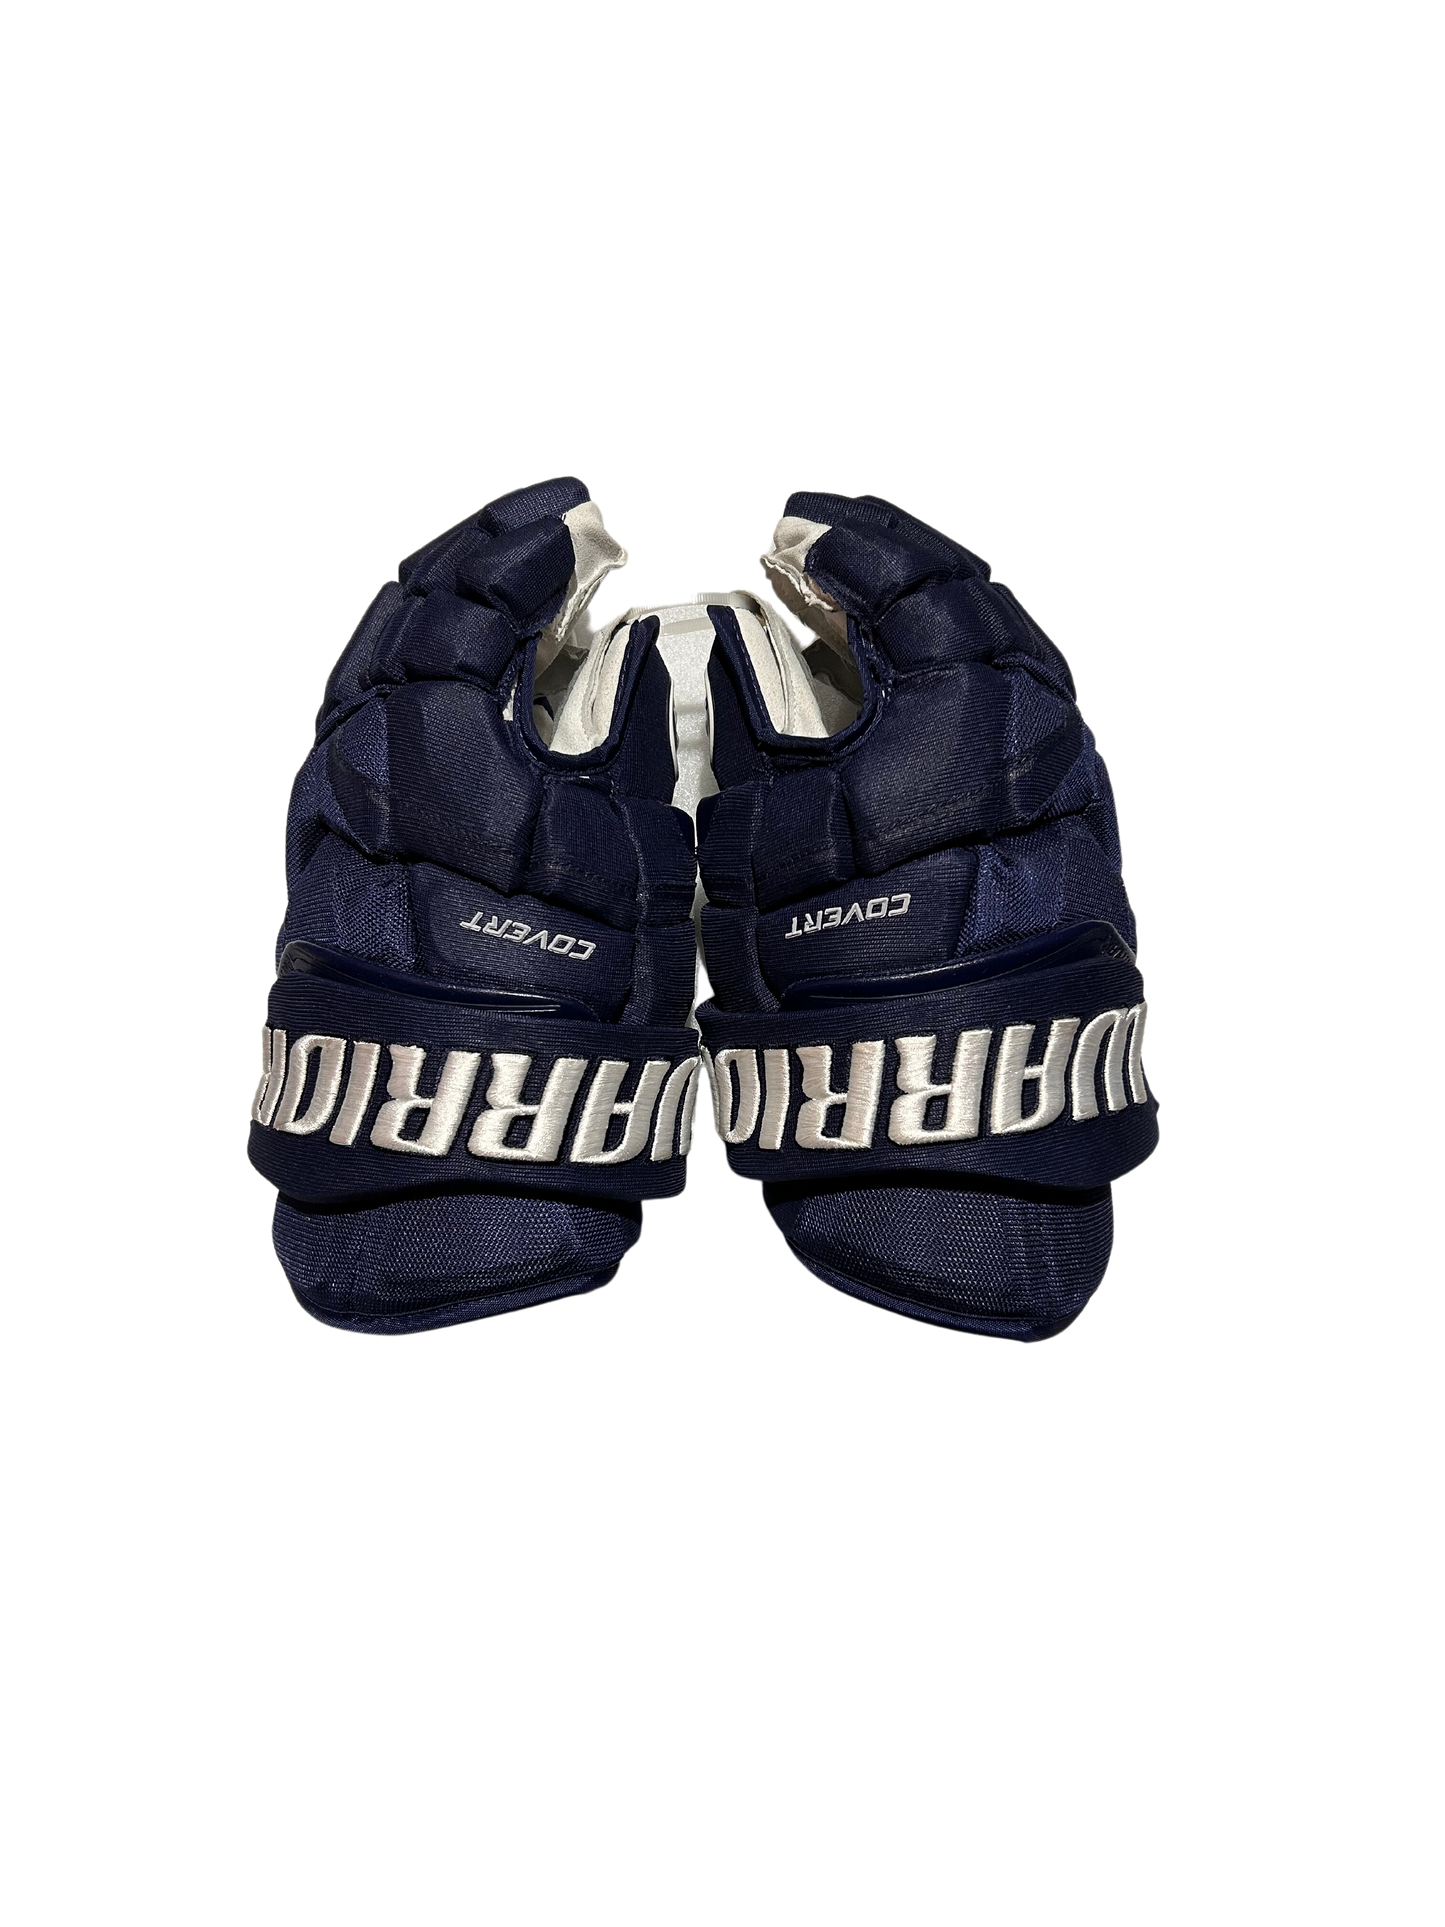 New Team Issued Navy Colorado Avalanche 14" Warrior Covert QRE Gloves (Multiple Sizes)